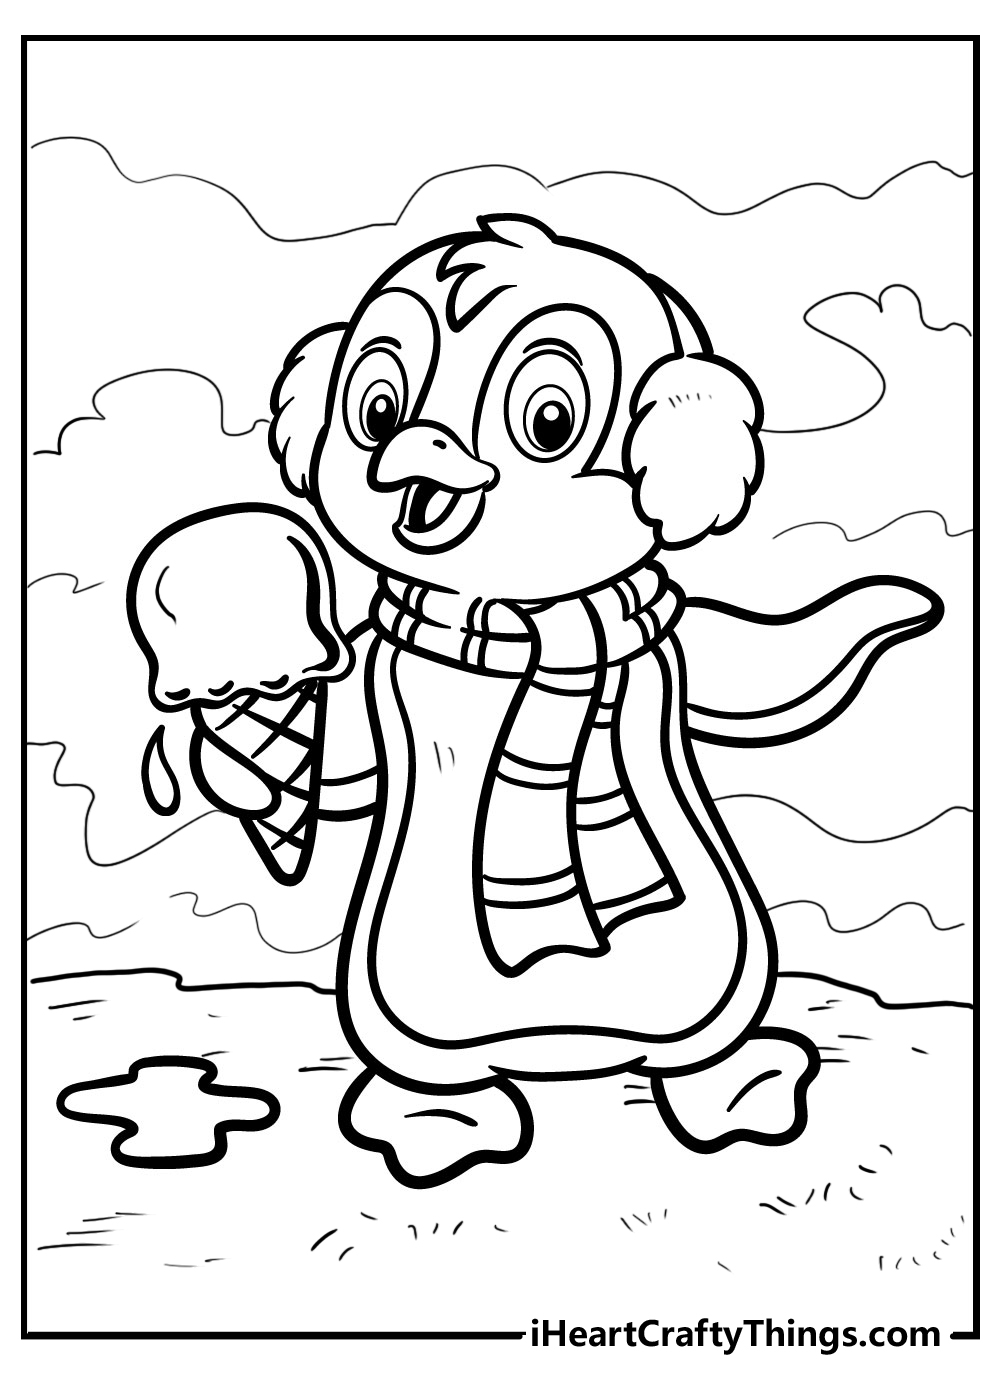 pingu penguin coloring pages free printable